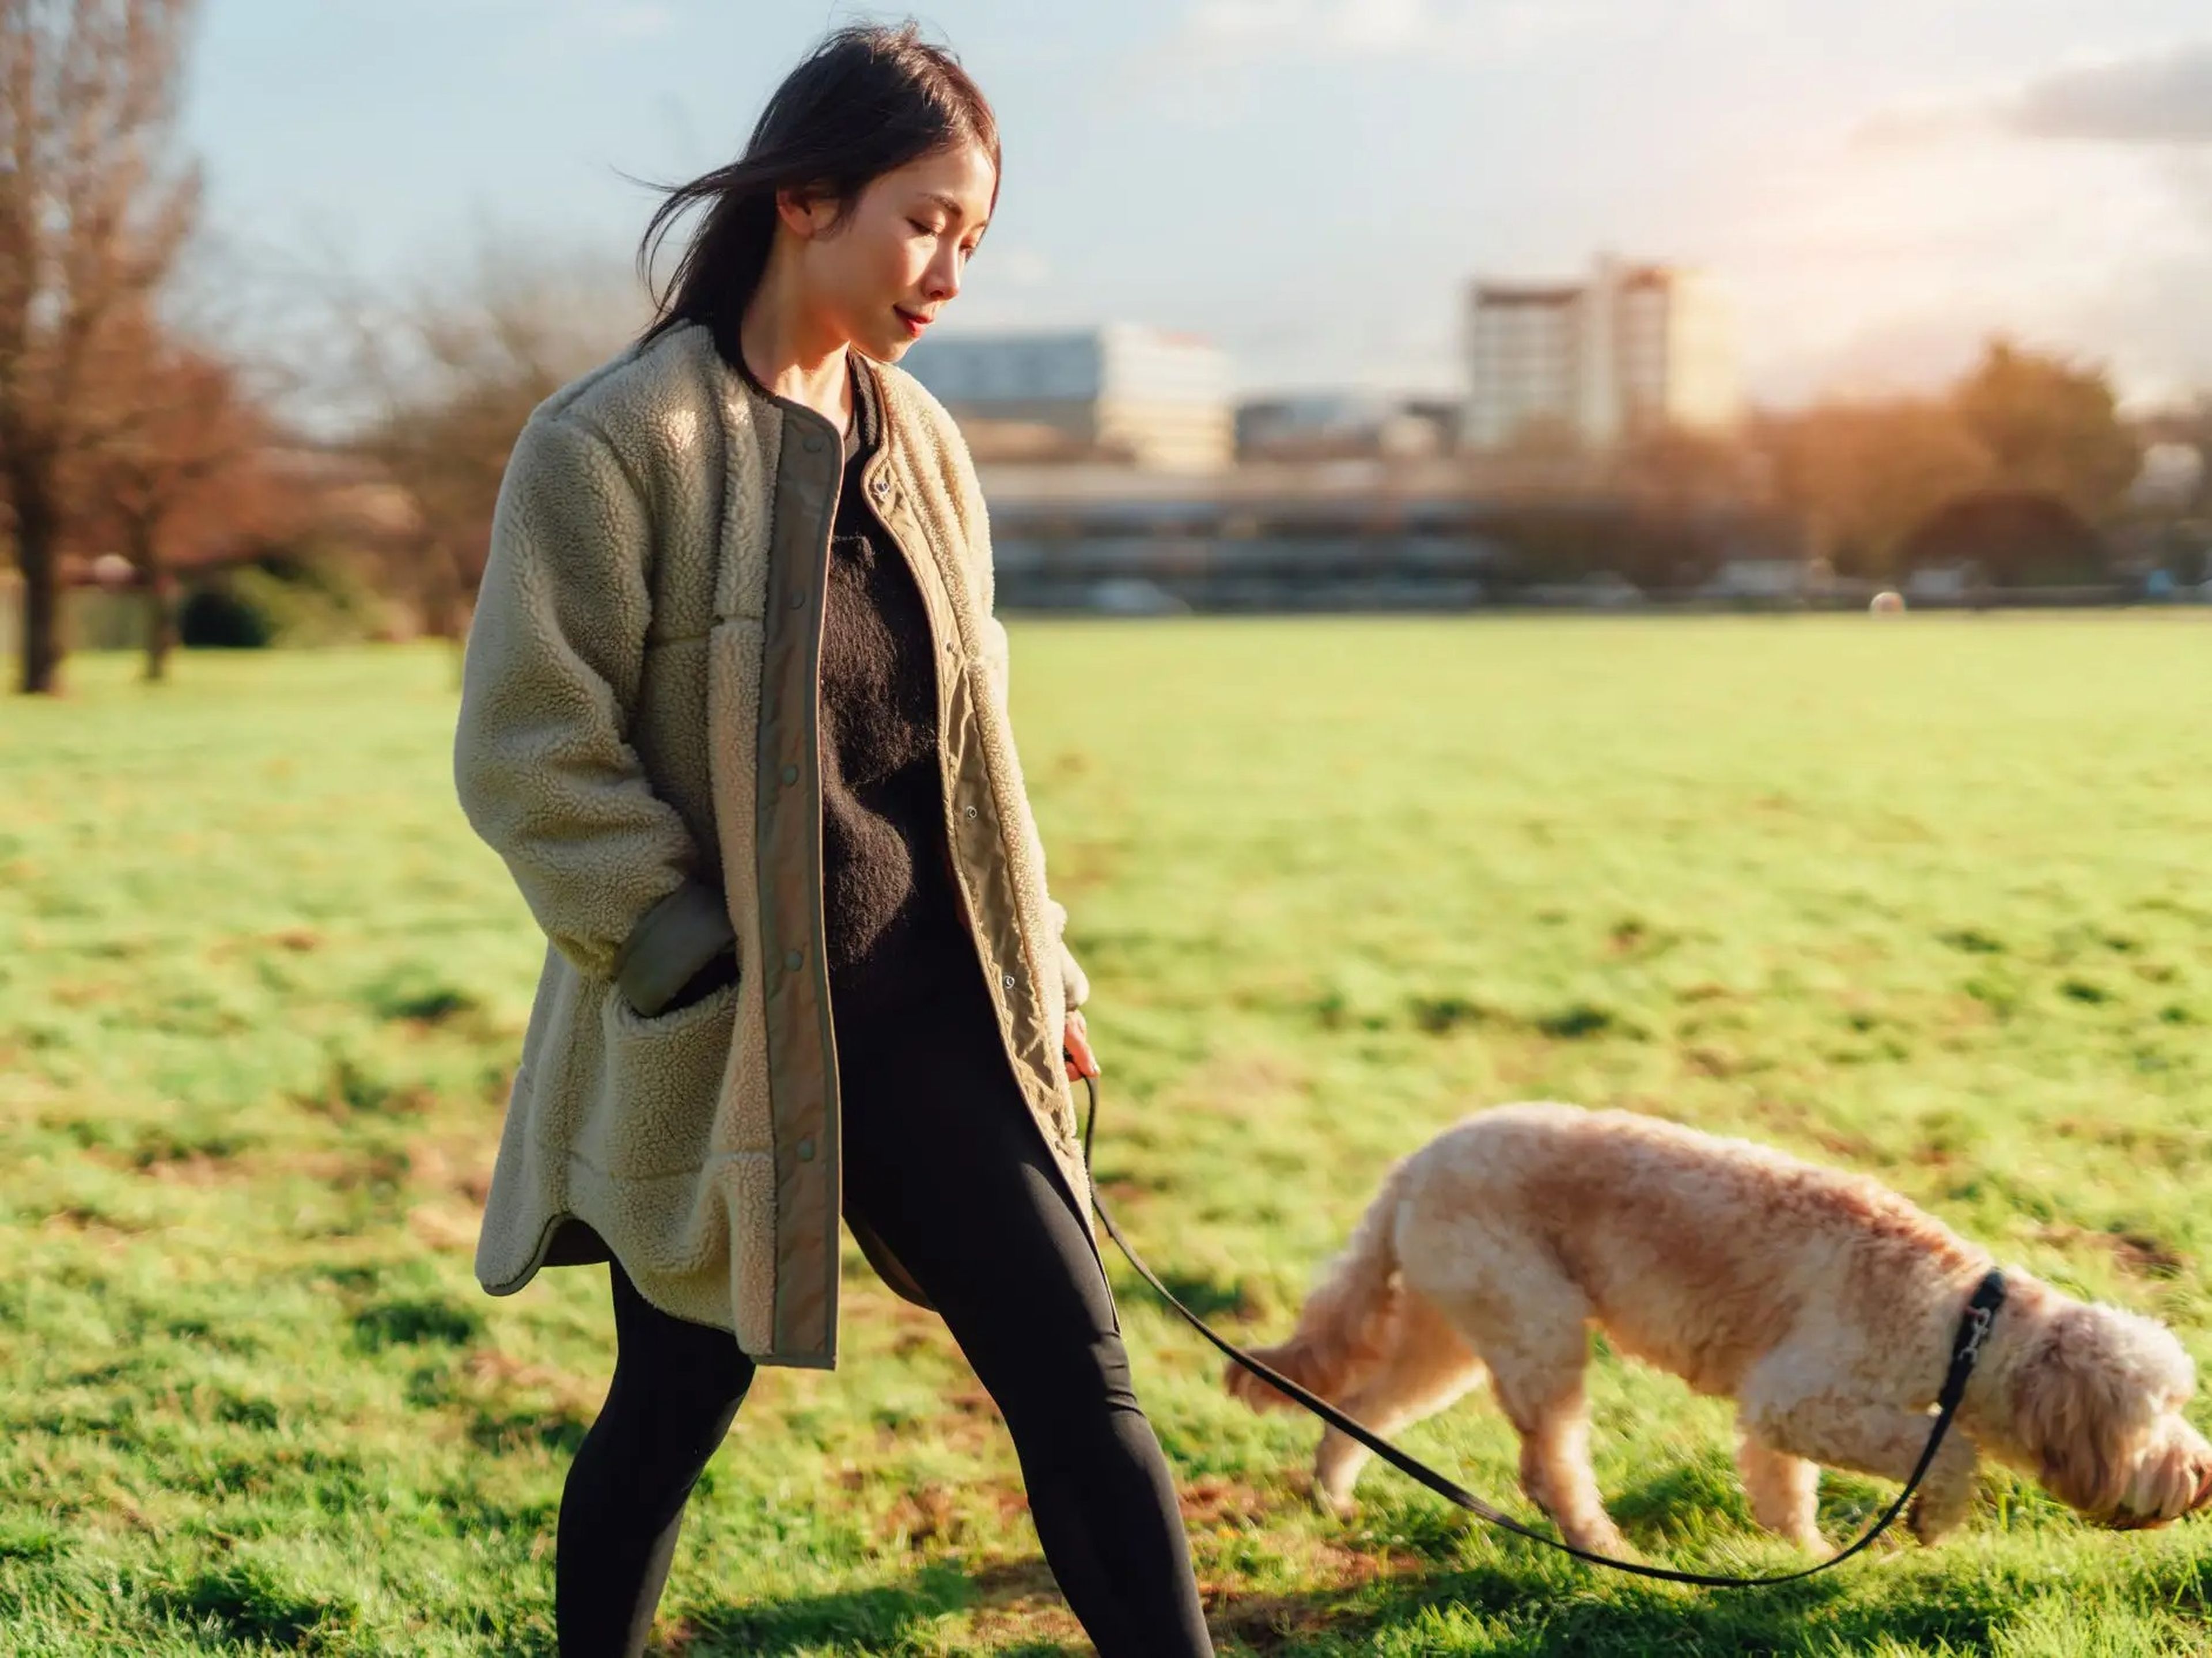 a woman walking a dog in a sunny park with a cityscape in the background